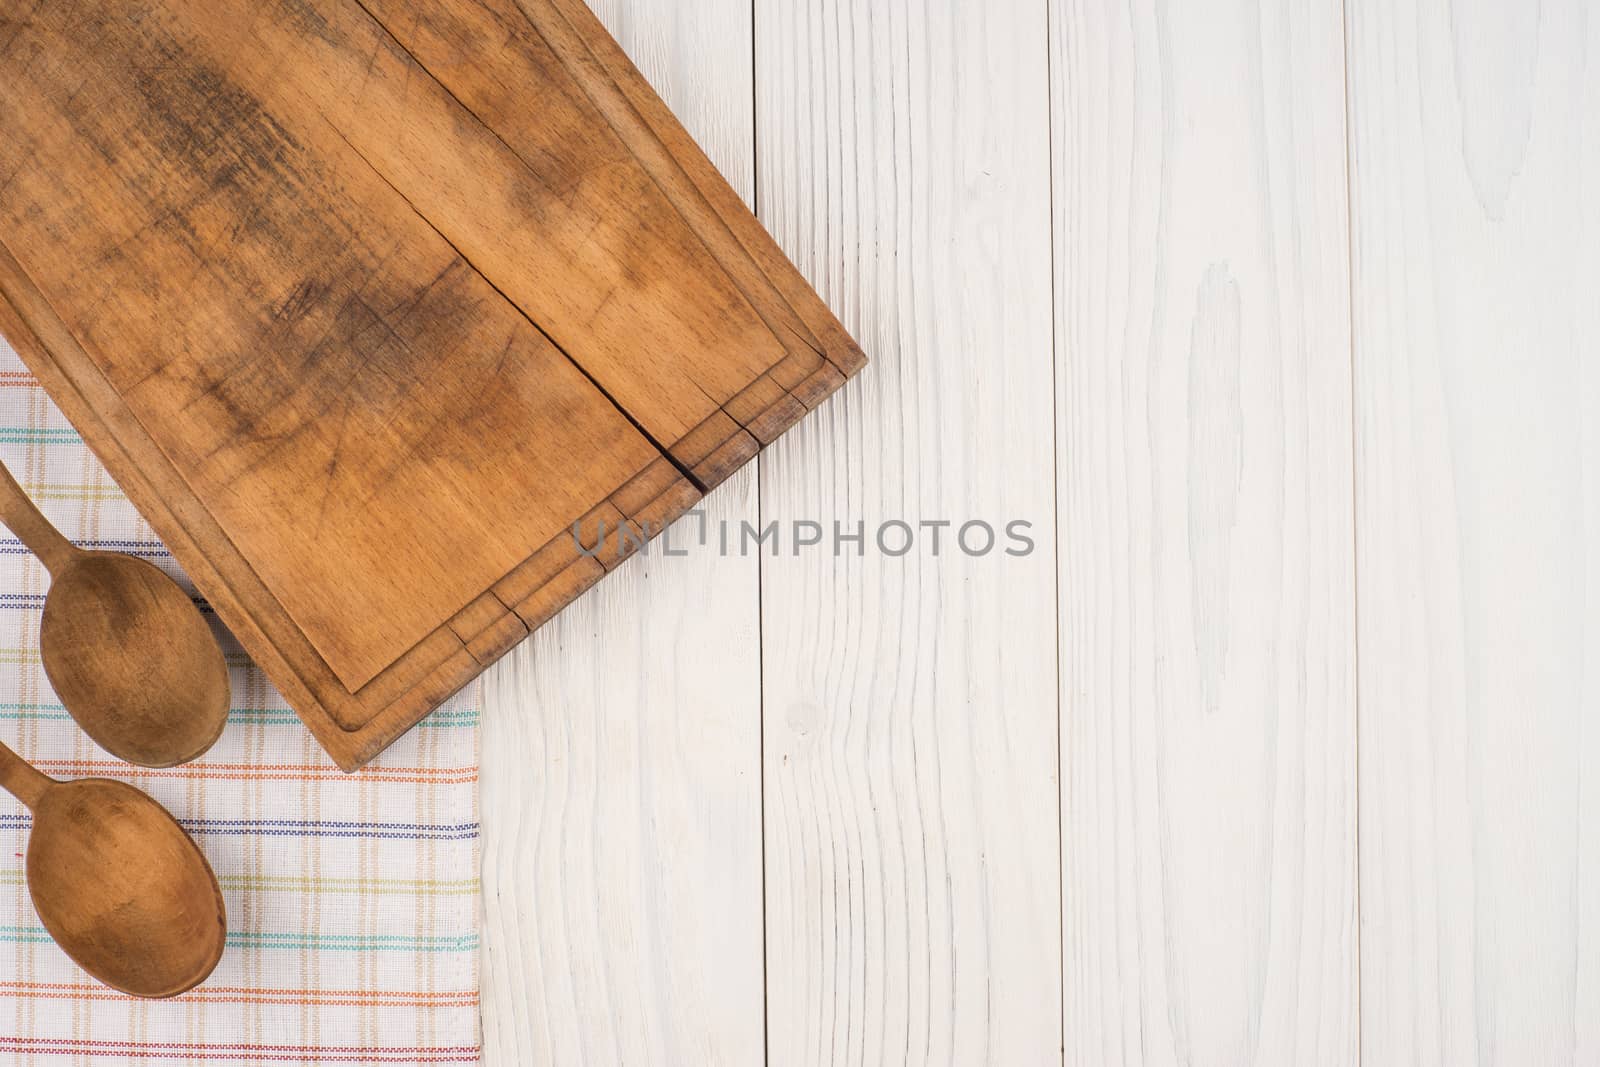 Cutting board and a spoon on a kitchen napkin on old wooden table. Top view.